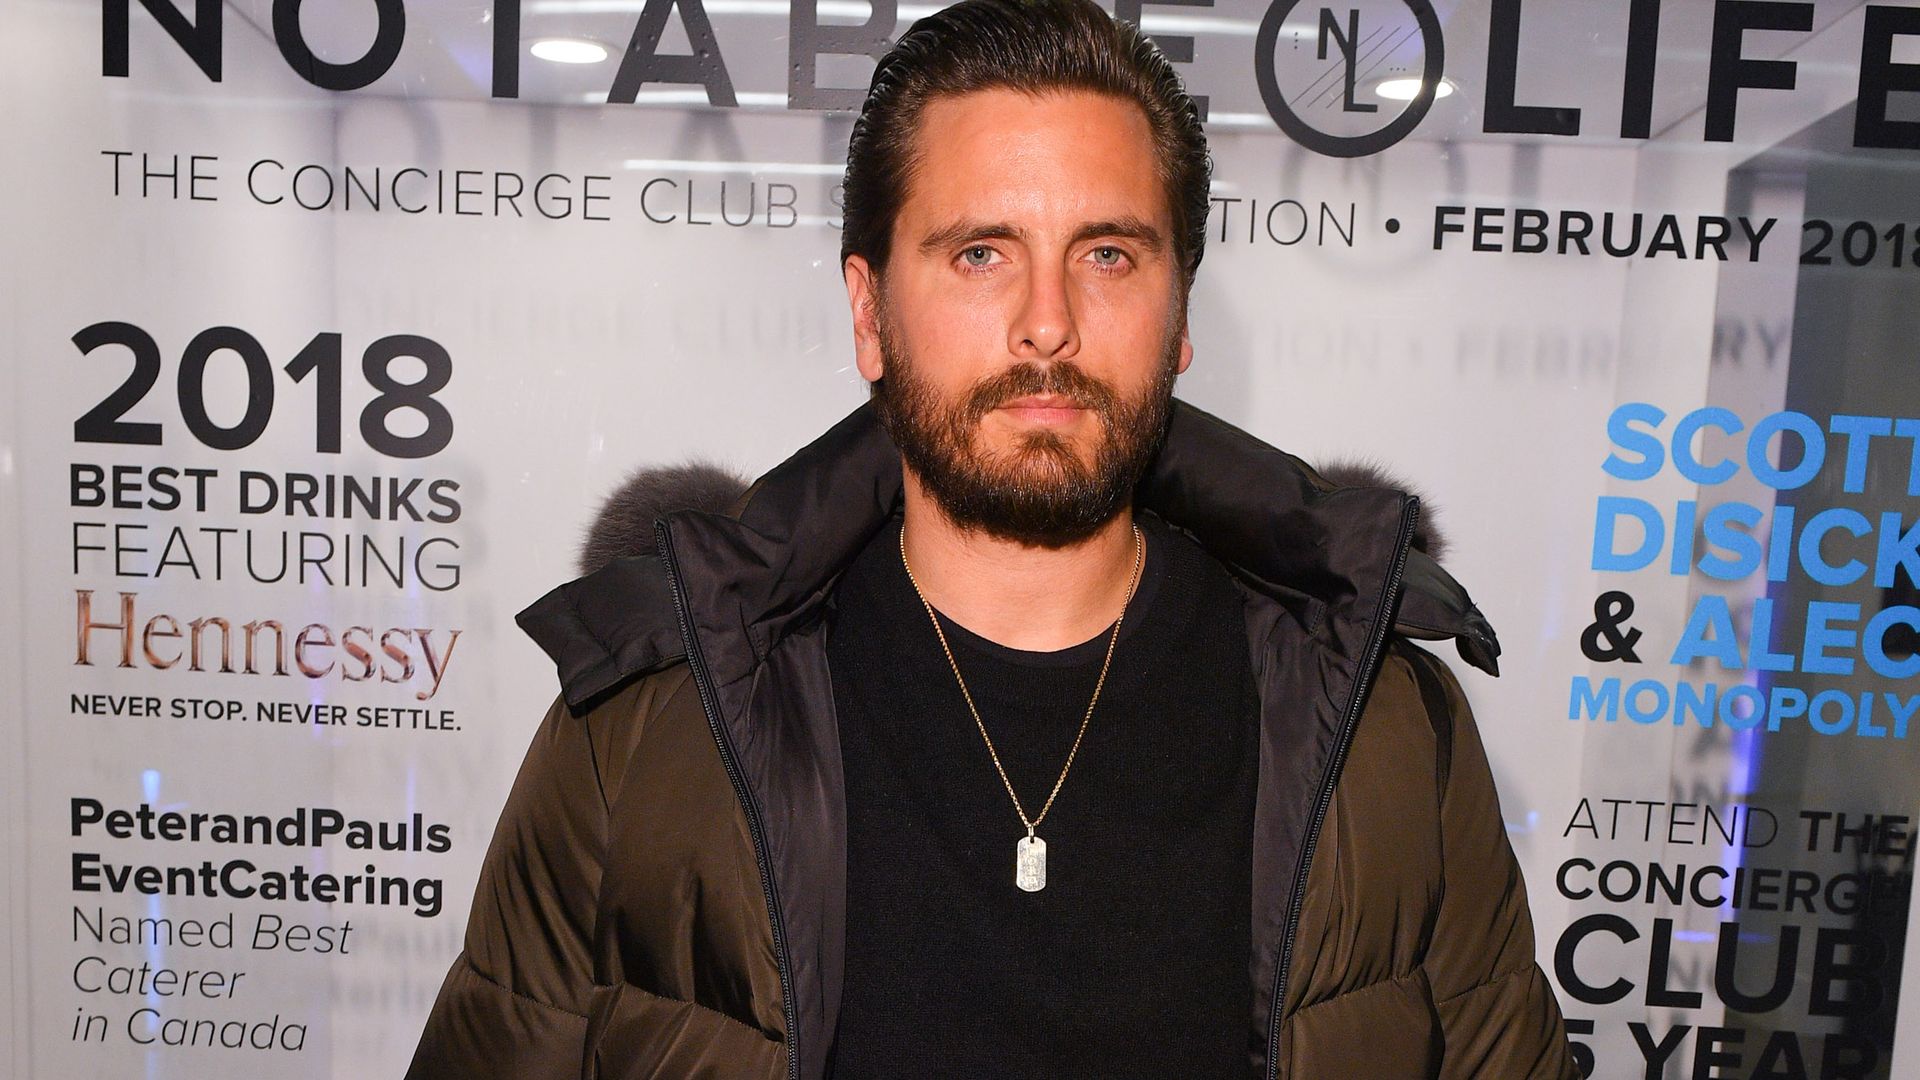 Scott Disick's appearance sparks reaction as he shares brand new photo